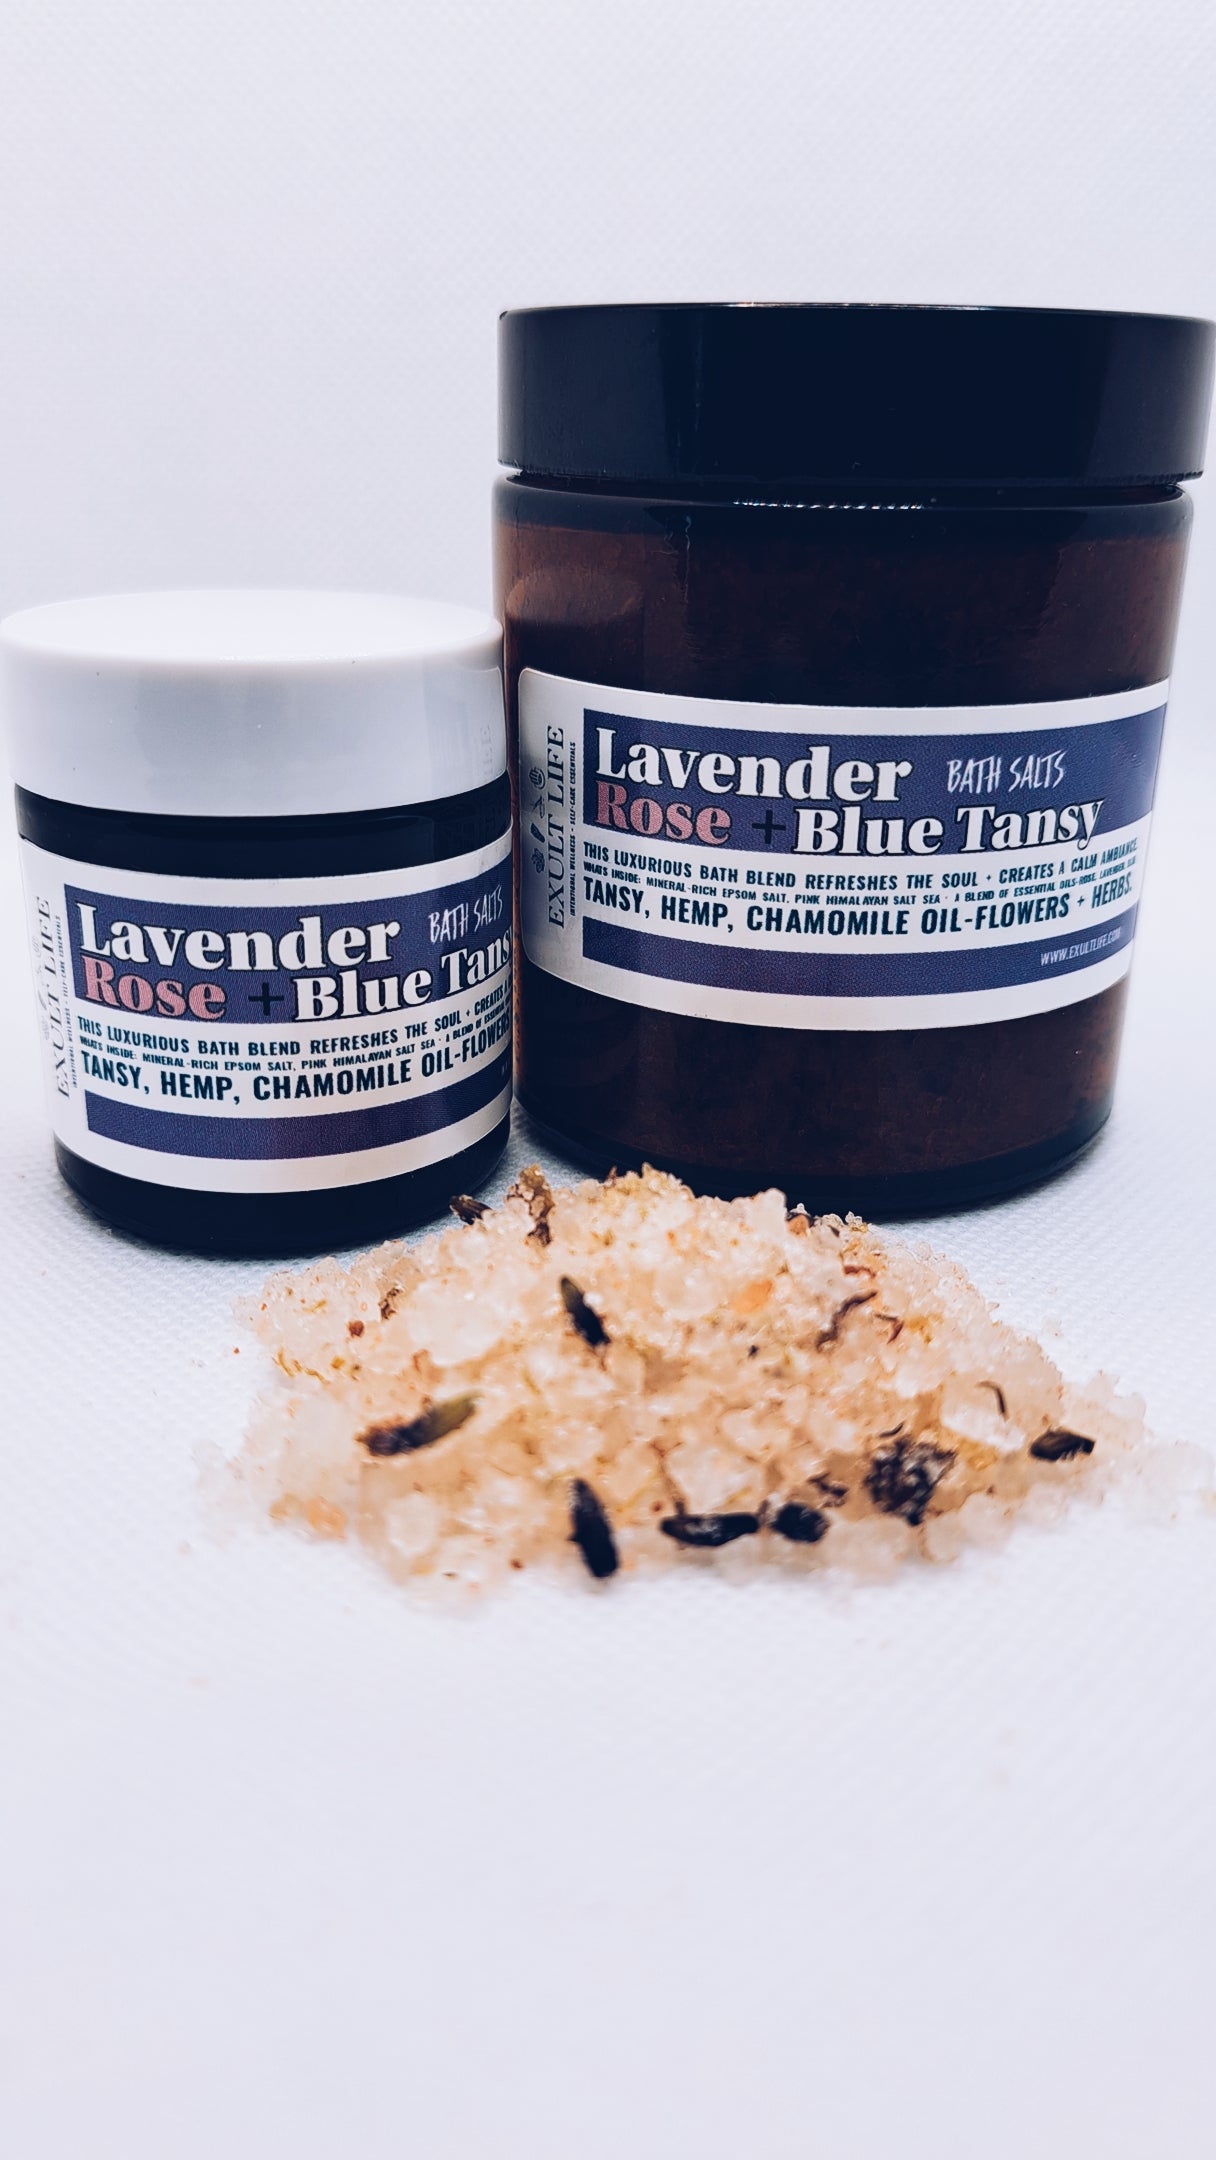 This luxurious bath soak comes in two sizes - one ounces for a single luxurious bath or the four ounce jar.